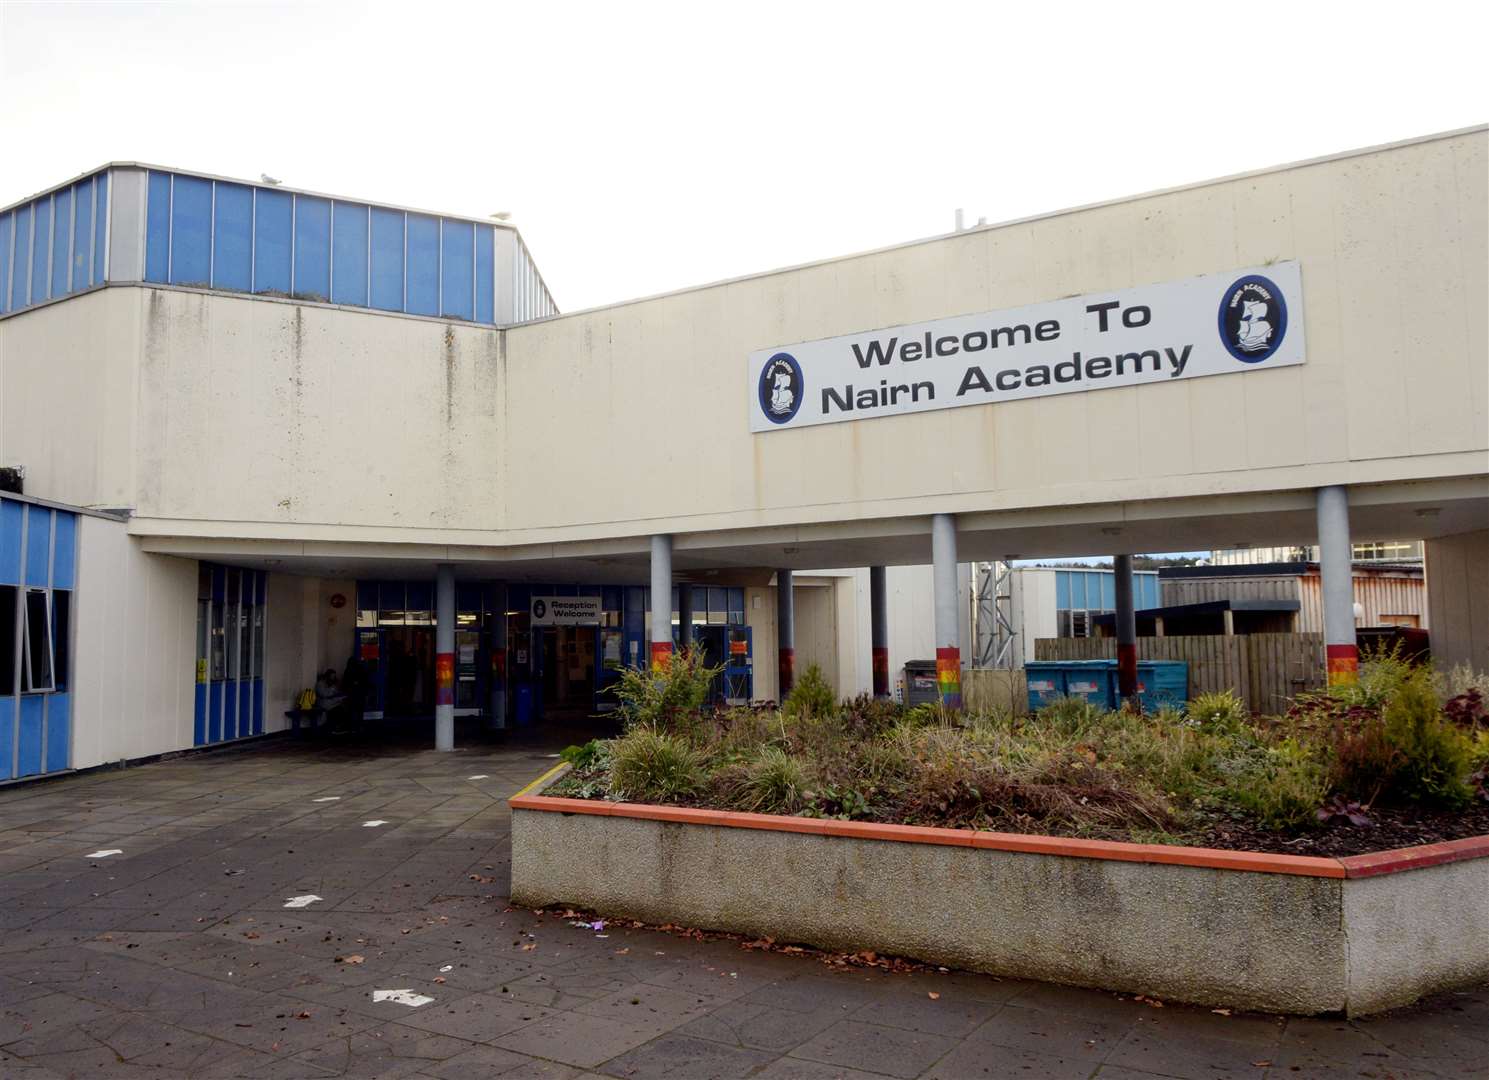 Nairn Academy will be replaced eventually.